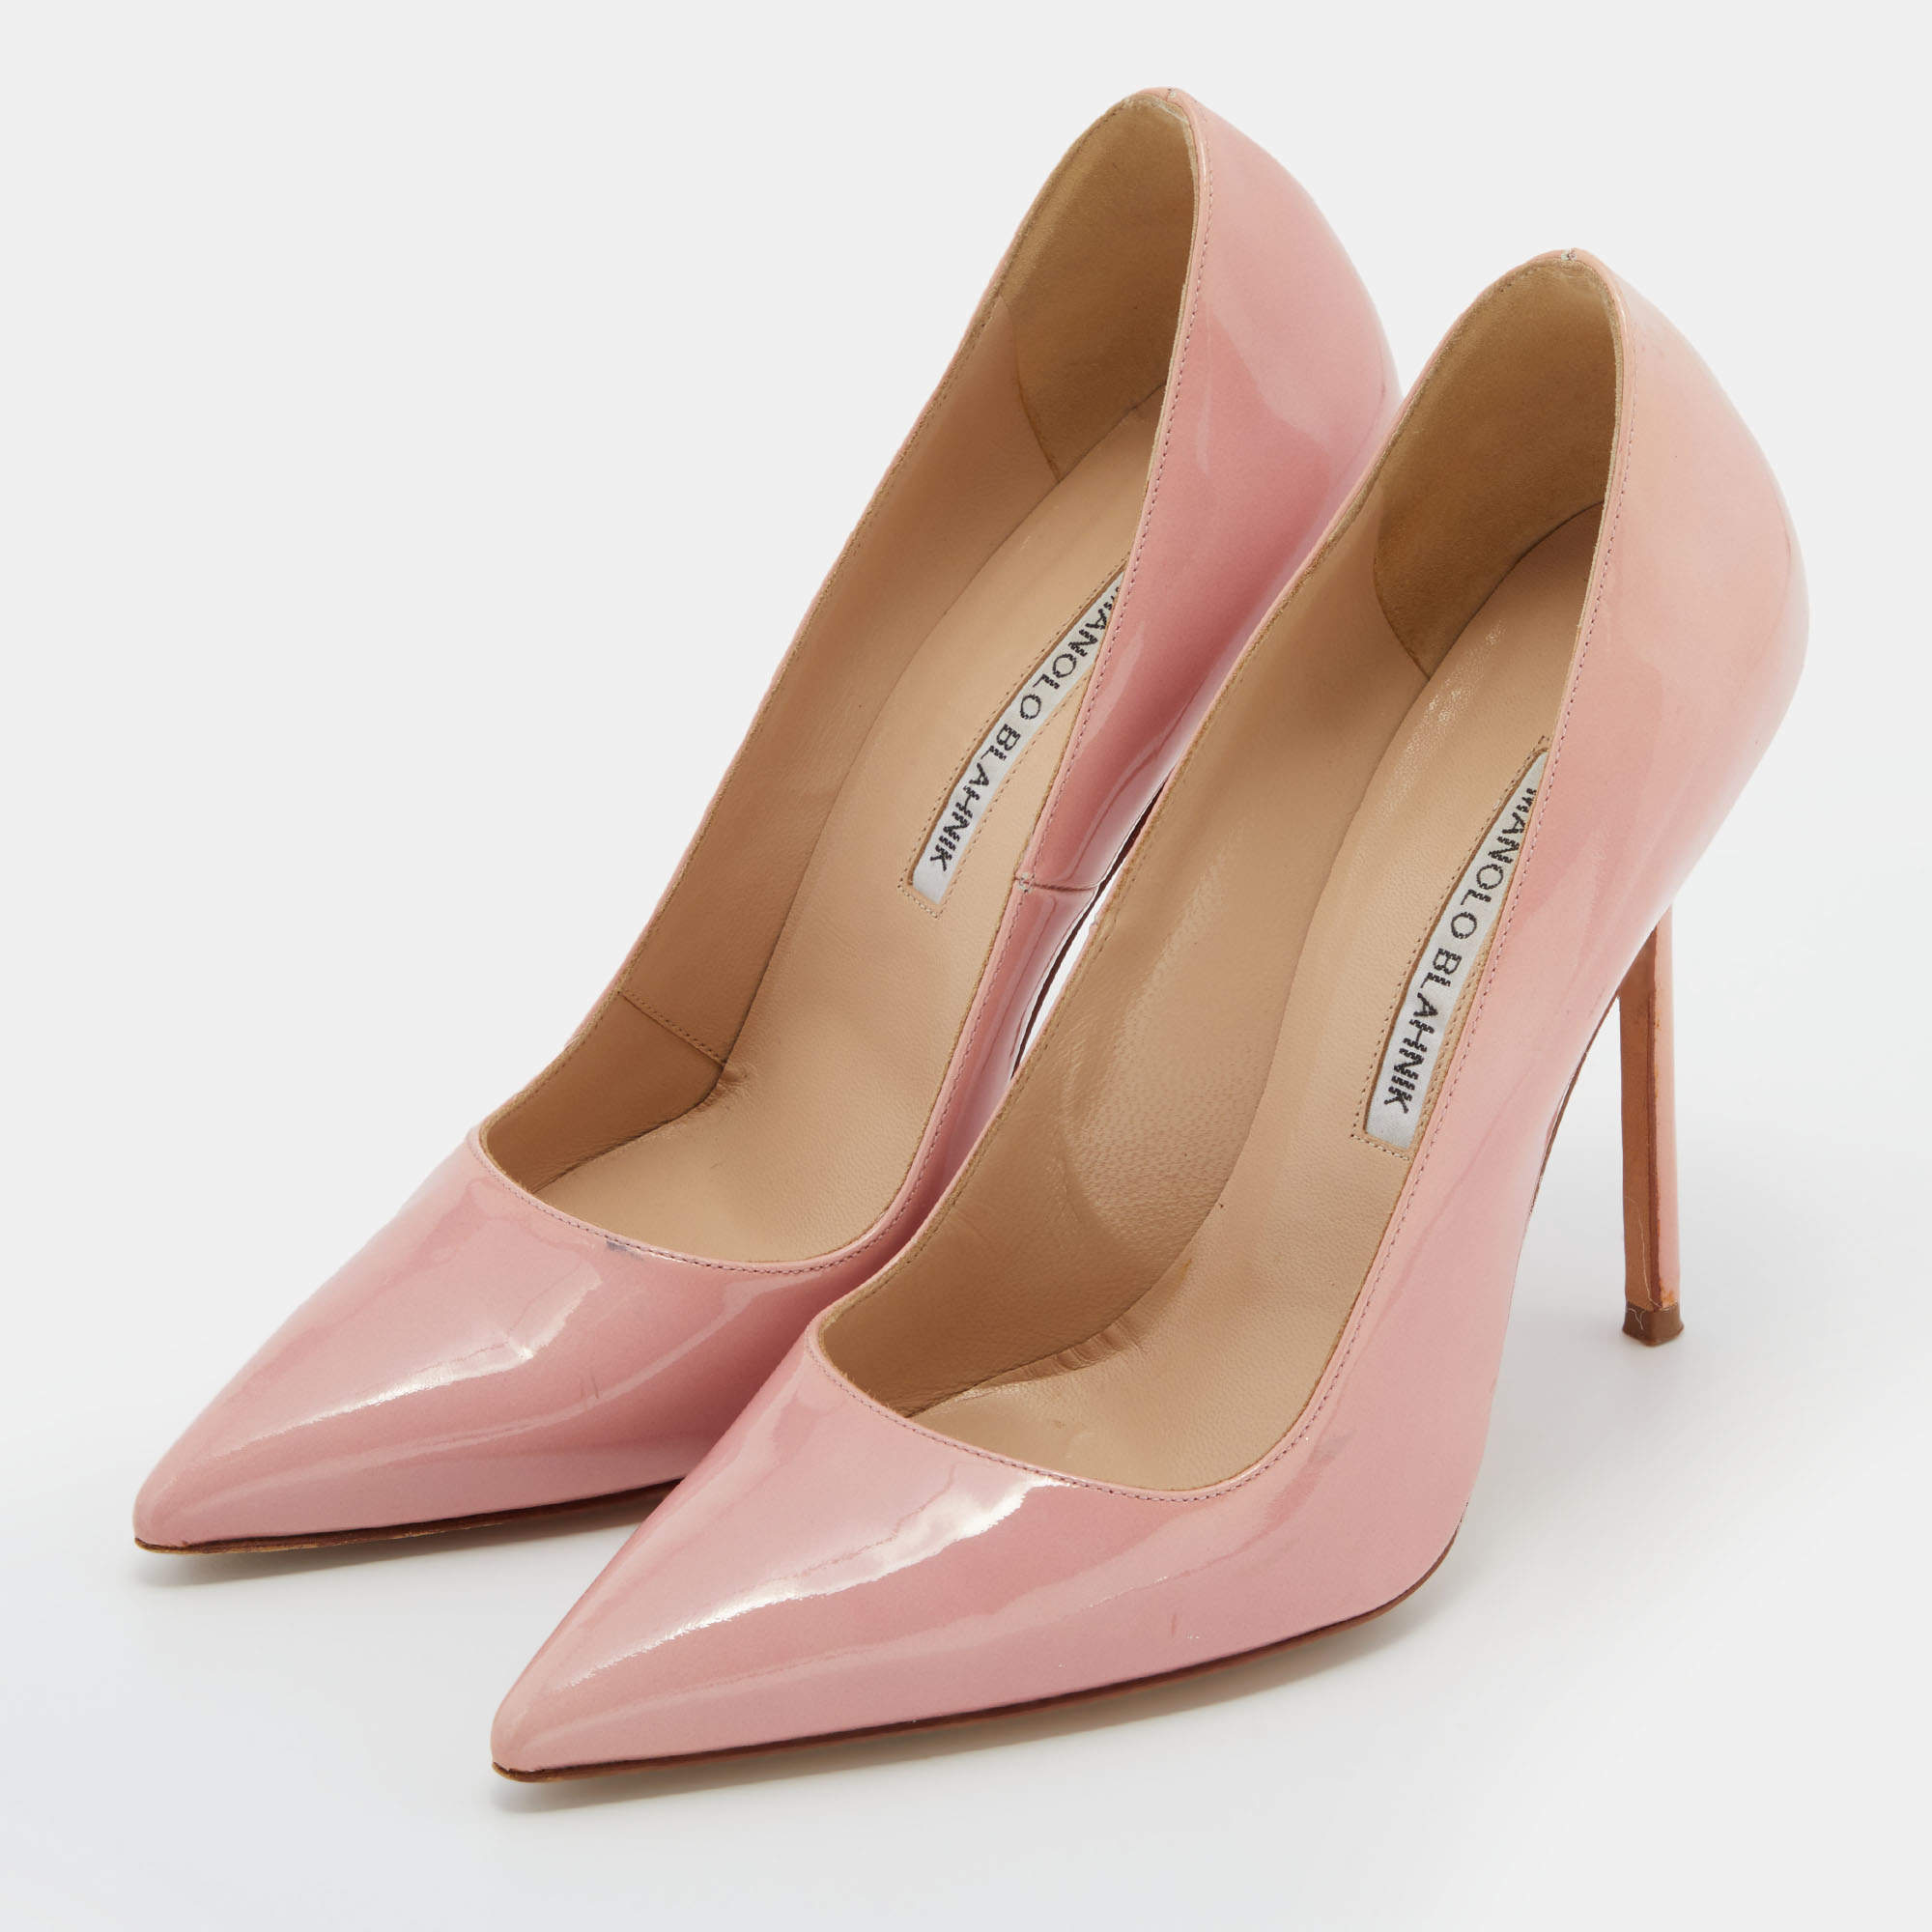 Manolo Blahnik BB 115 Pink Patent Leather 4" Pointed Toe Pumps  Stiletto 41 / 11